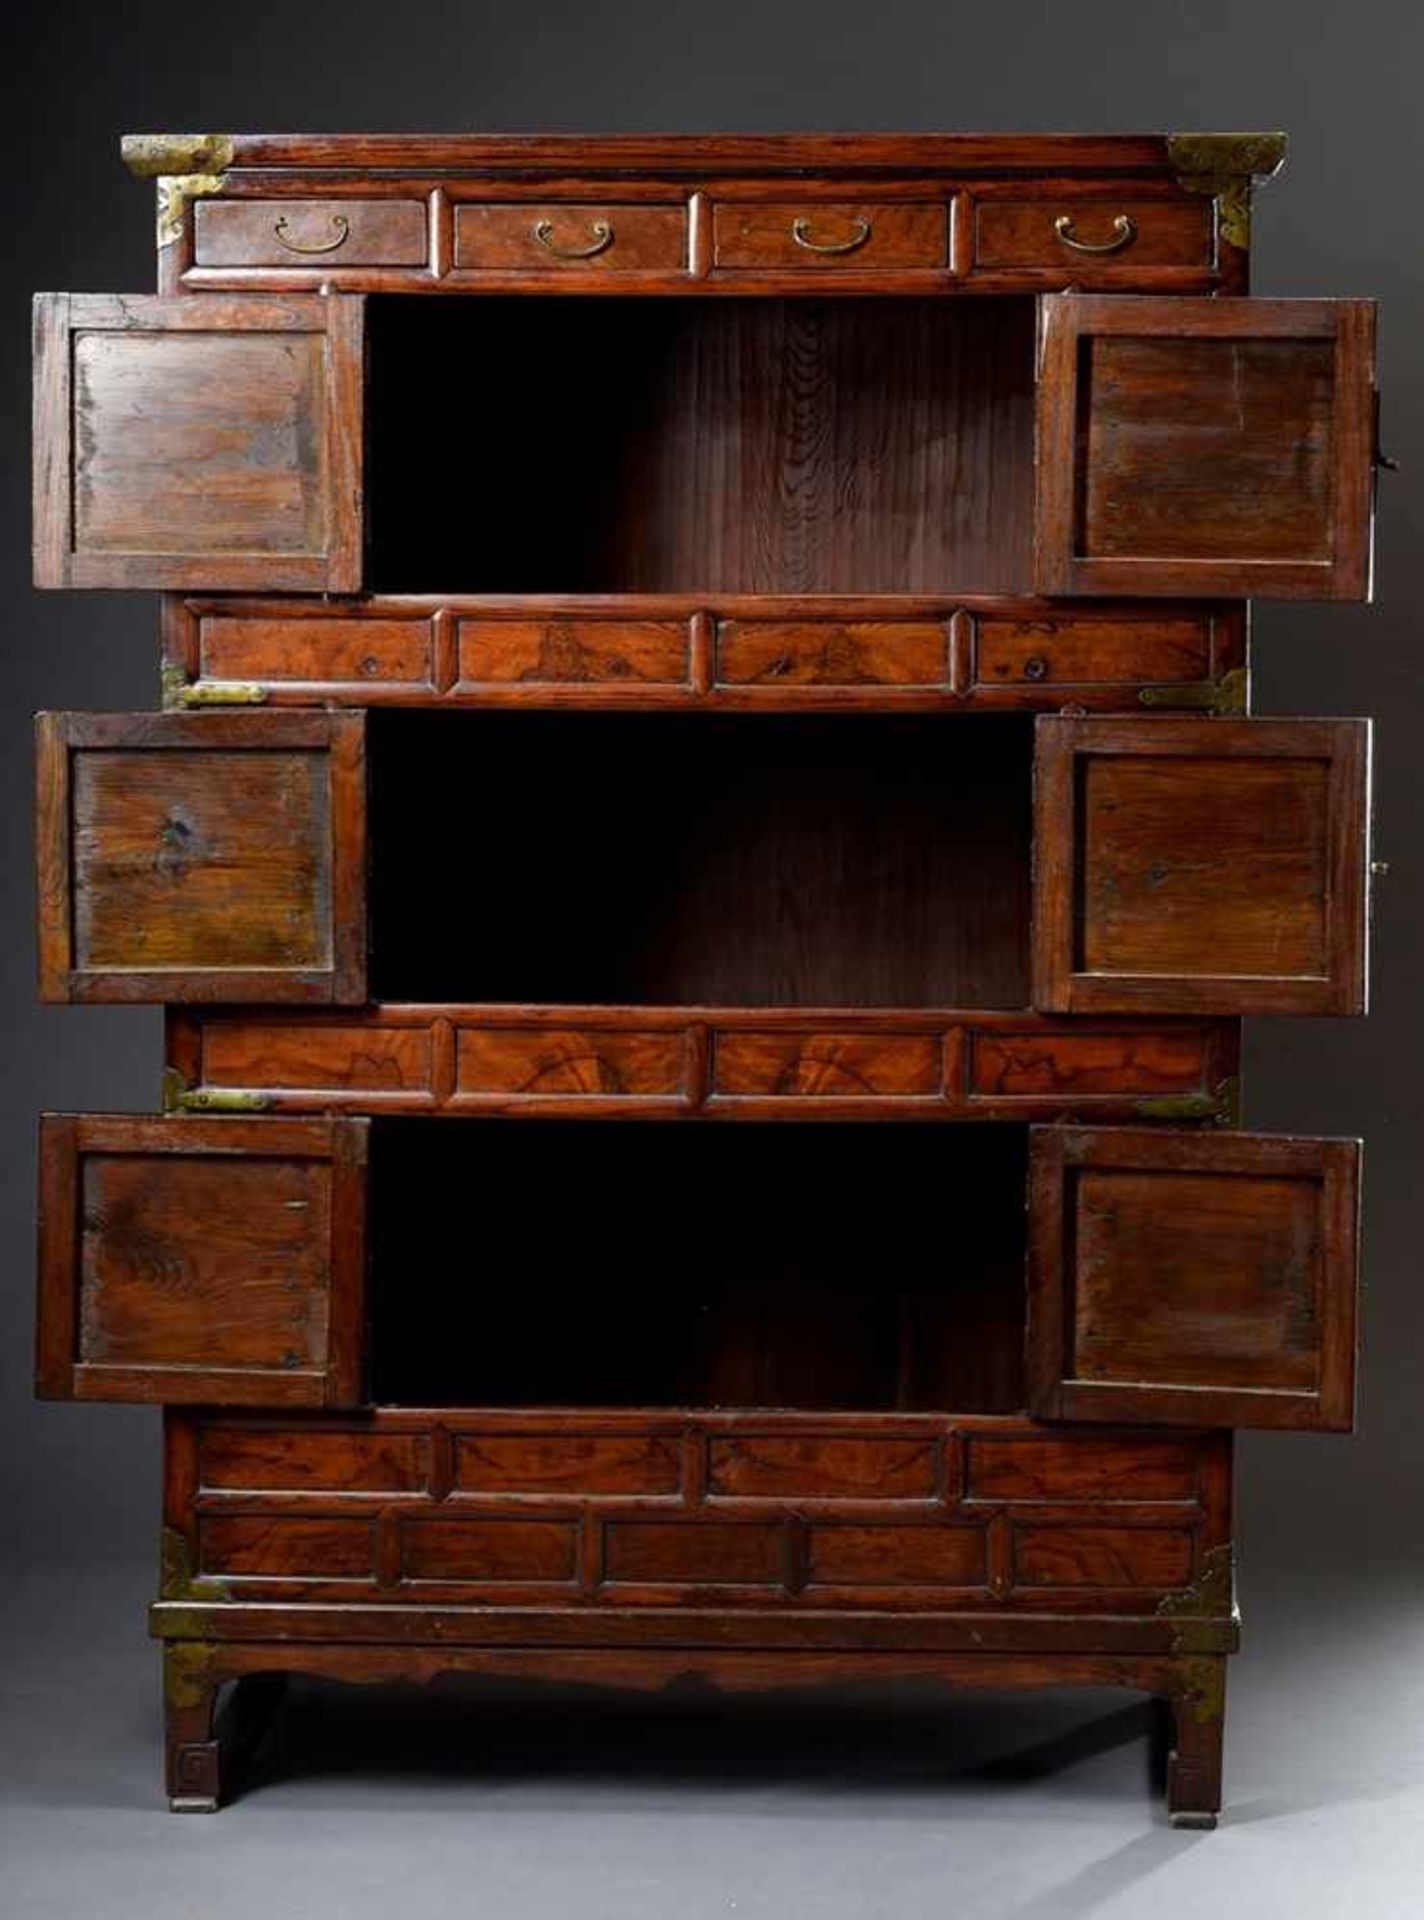 Large Korean "Rice Chest" with three double doors and 4 drawers, walnut with decorative brass - Image 3 of 9